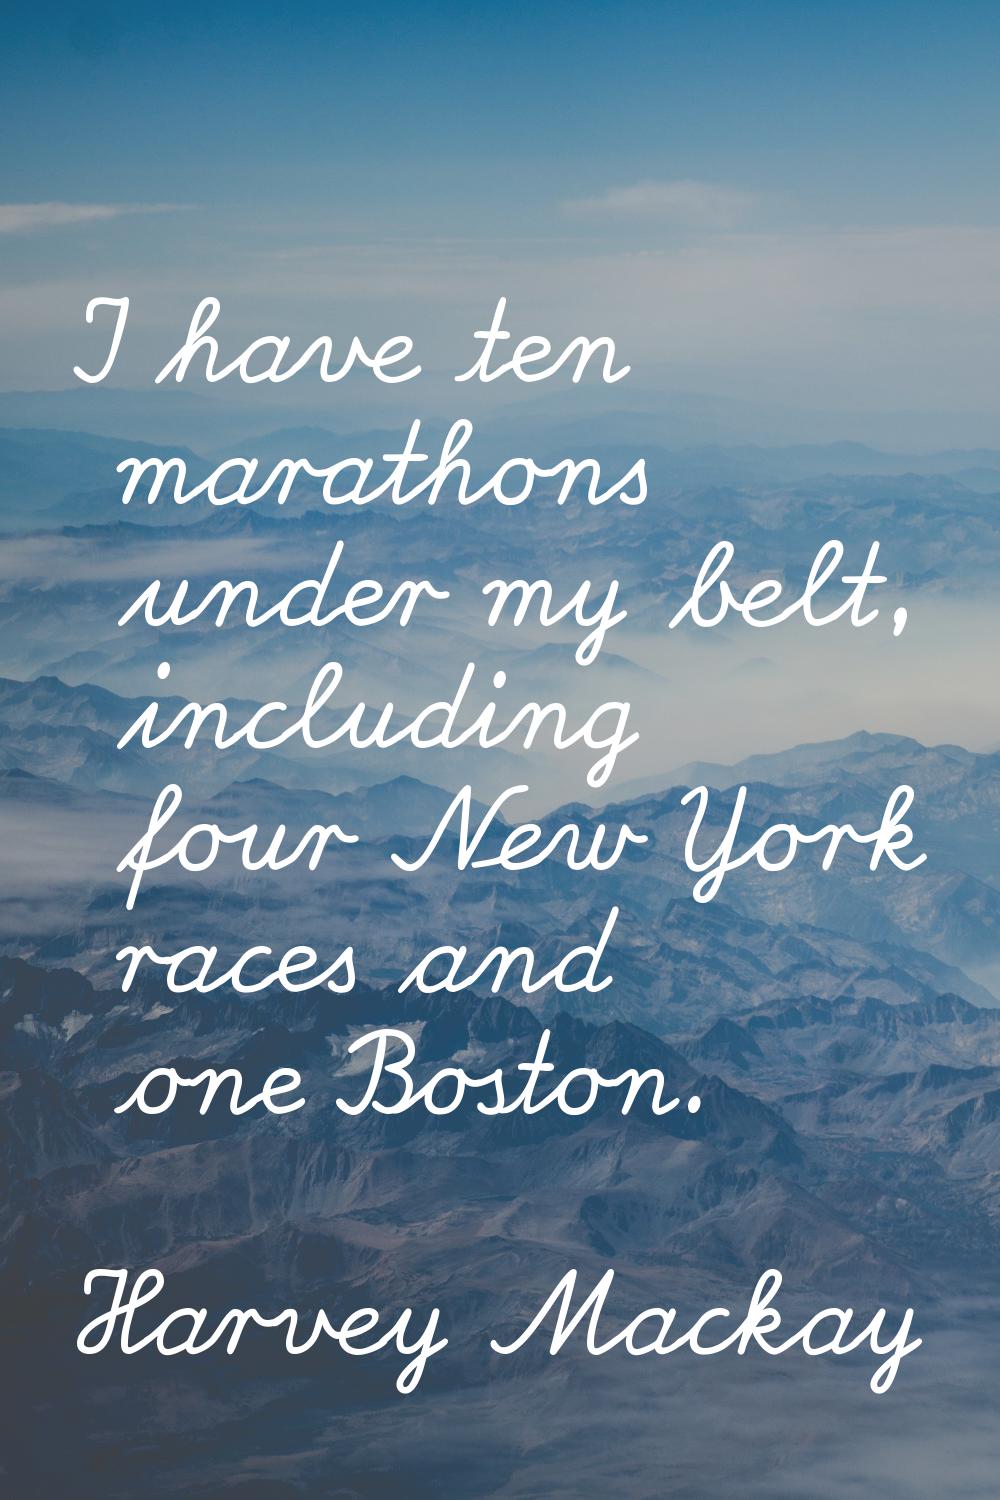 I have ten marathons under my belt, including four New York races and one Boston.